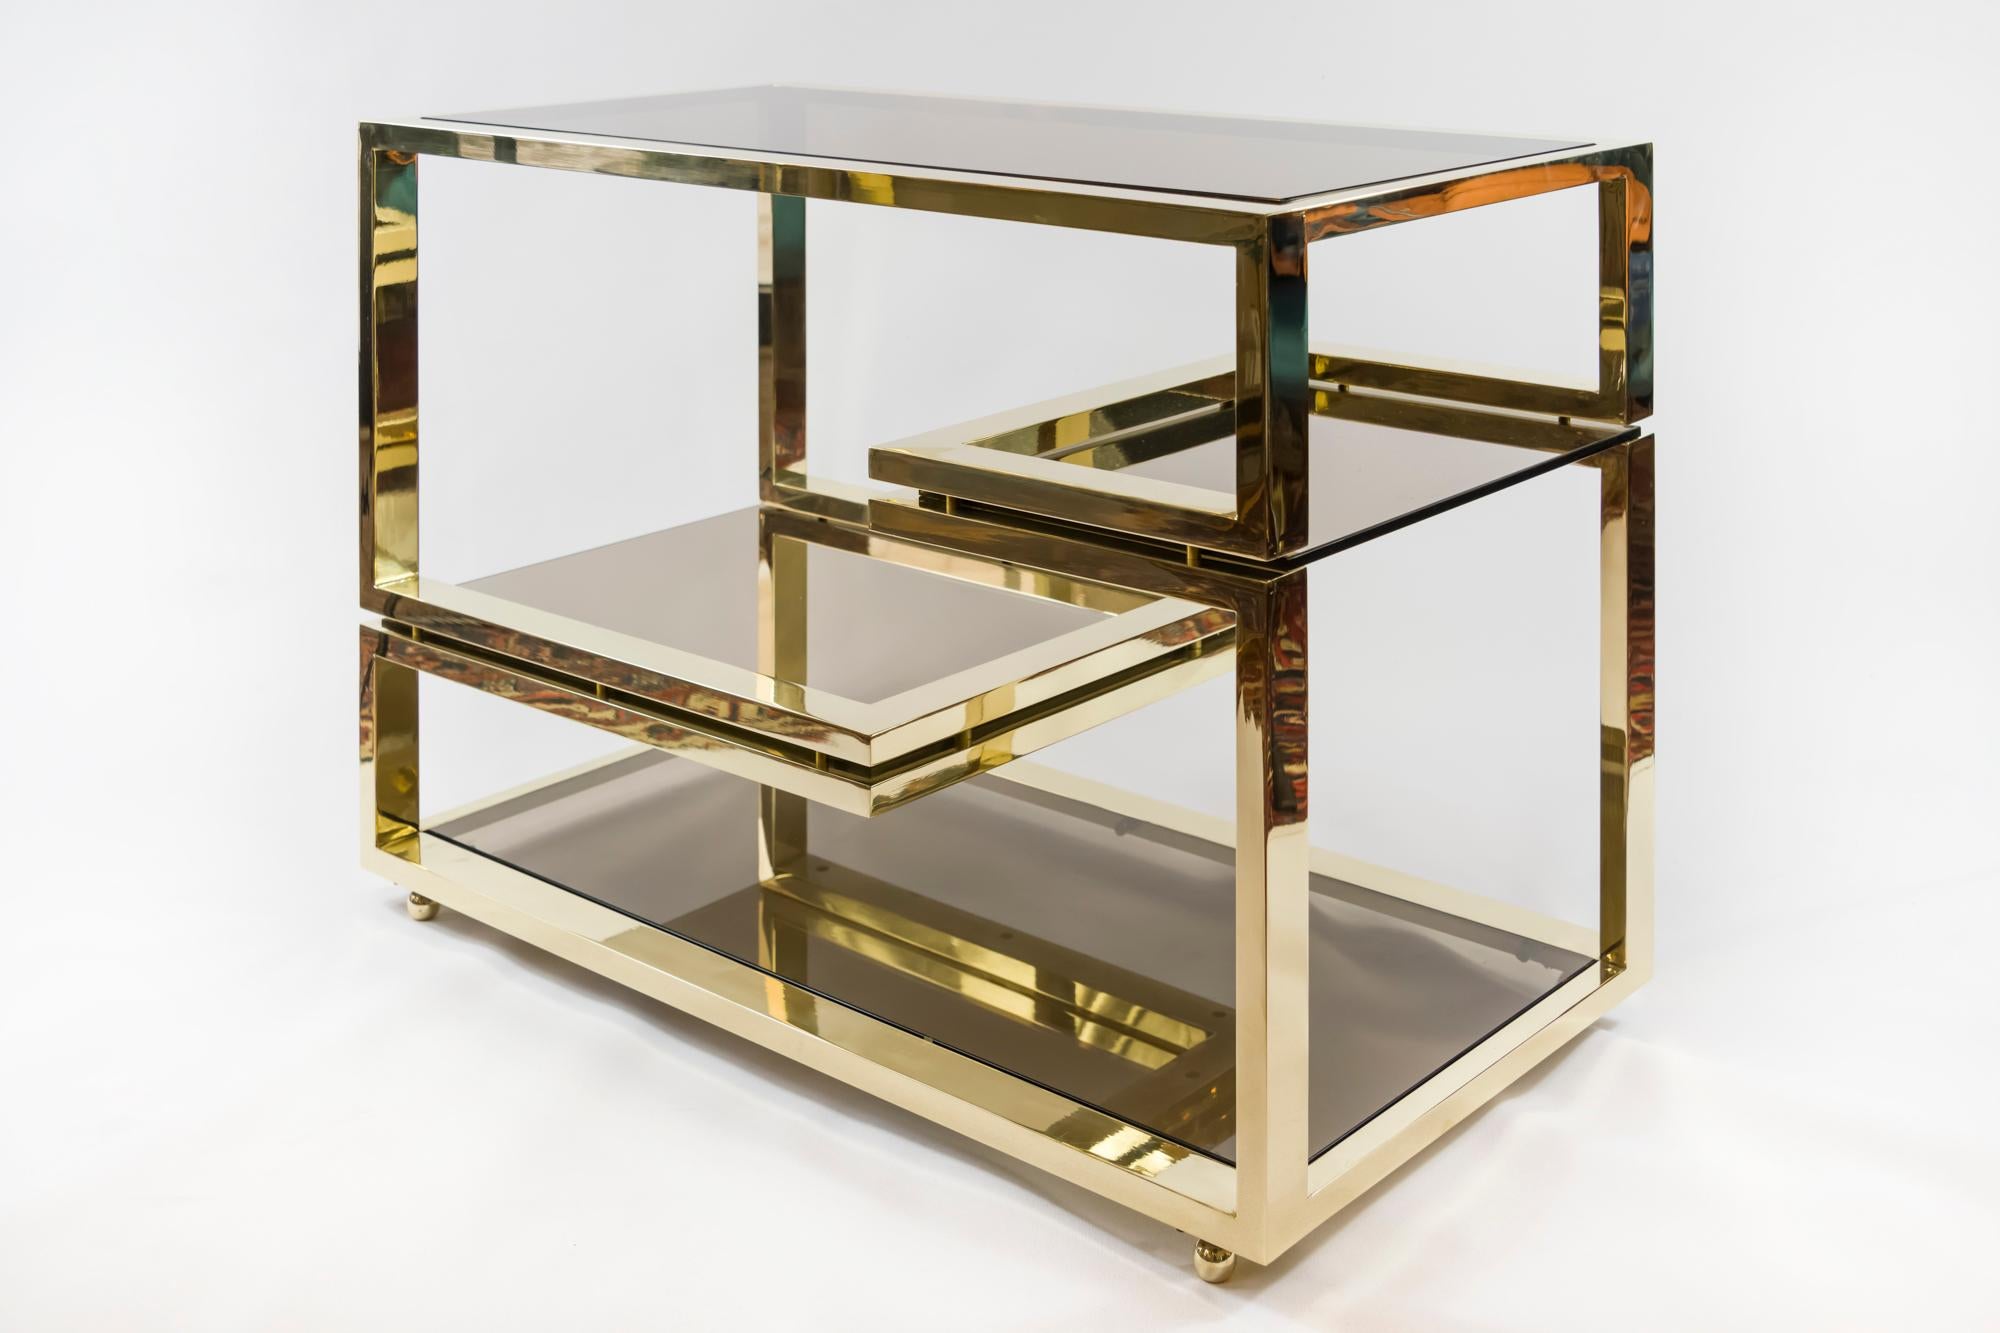 This midcentury Italian serving table is made of brass with smoked glass top, bottom and two shelves .
It is heavy and solid, very good condition.